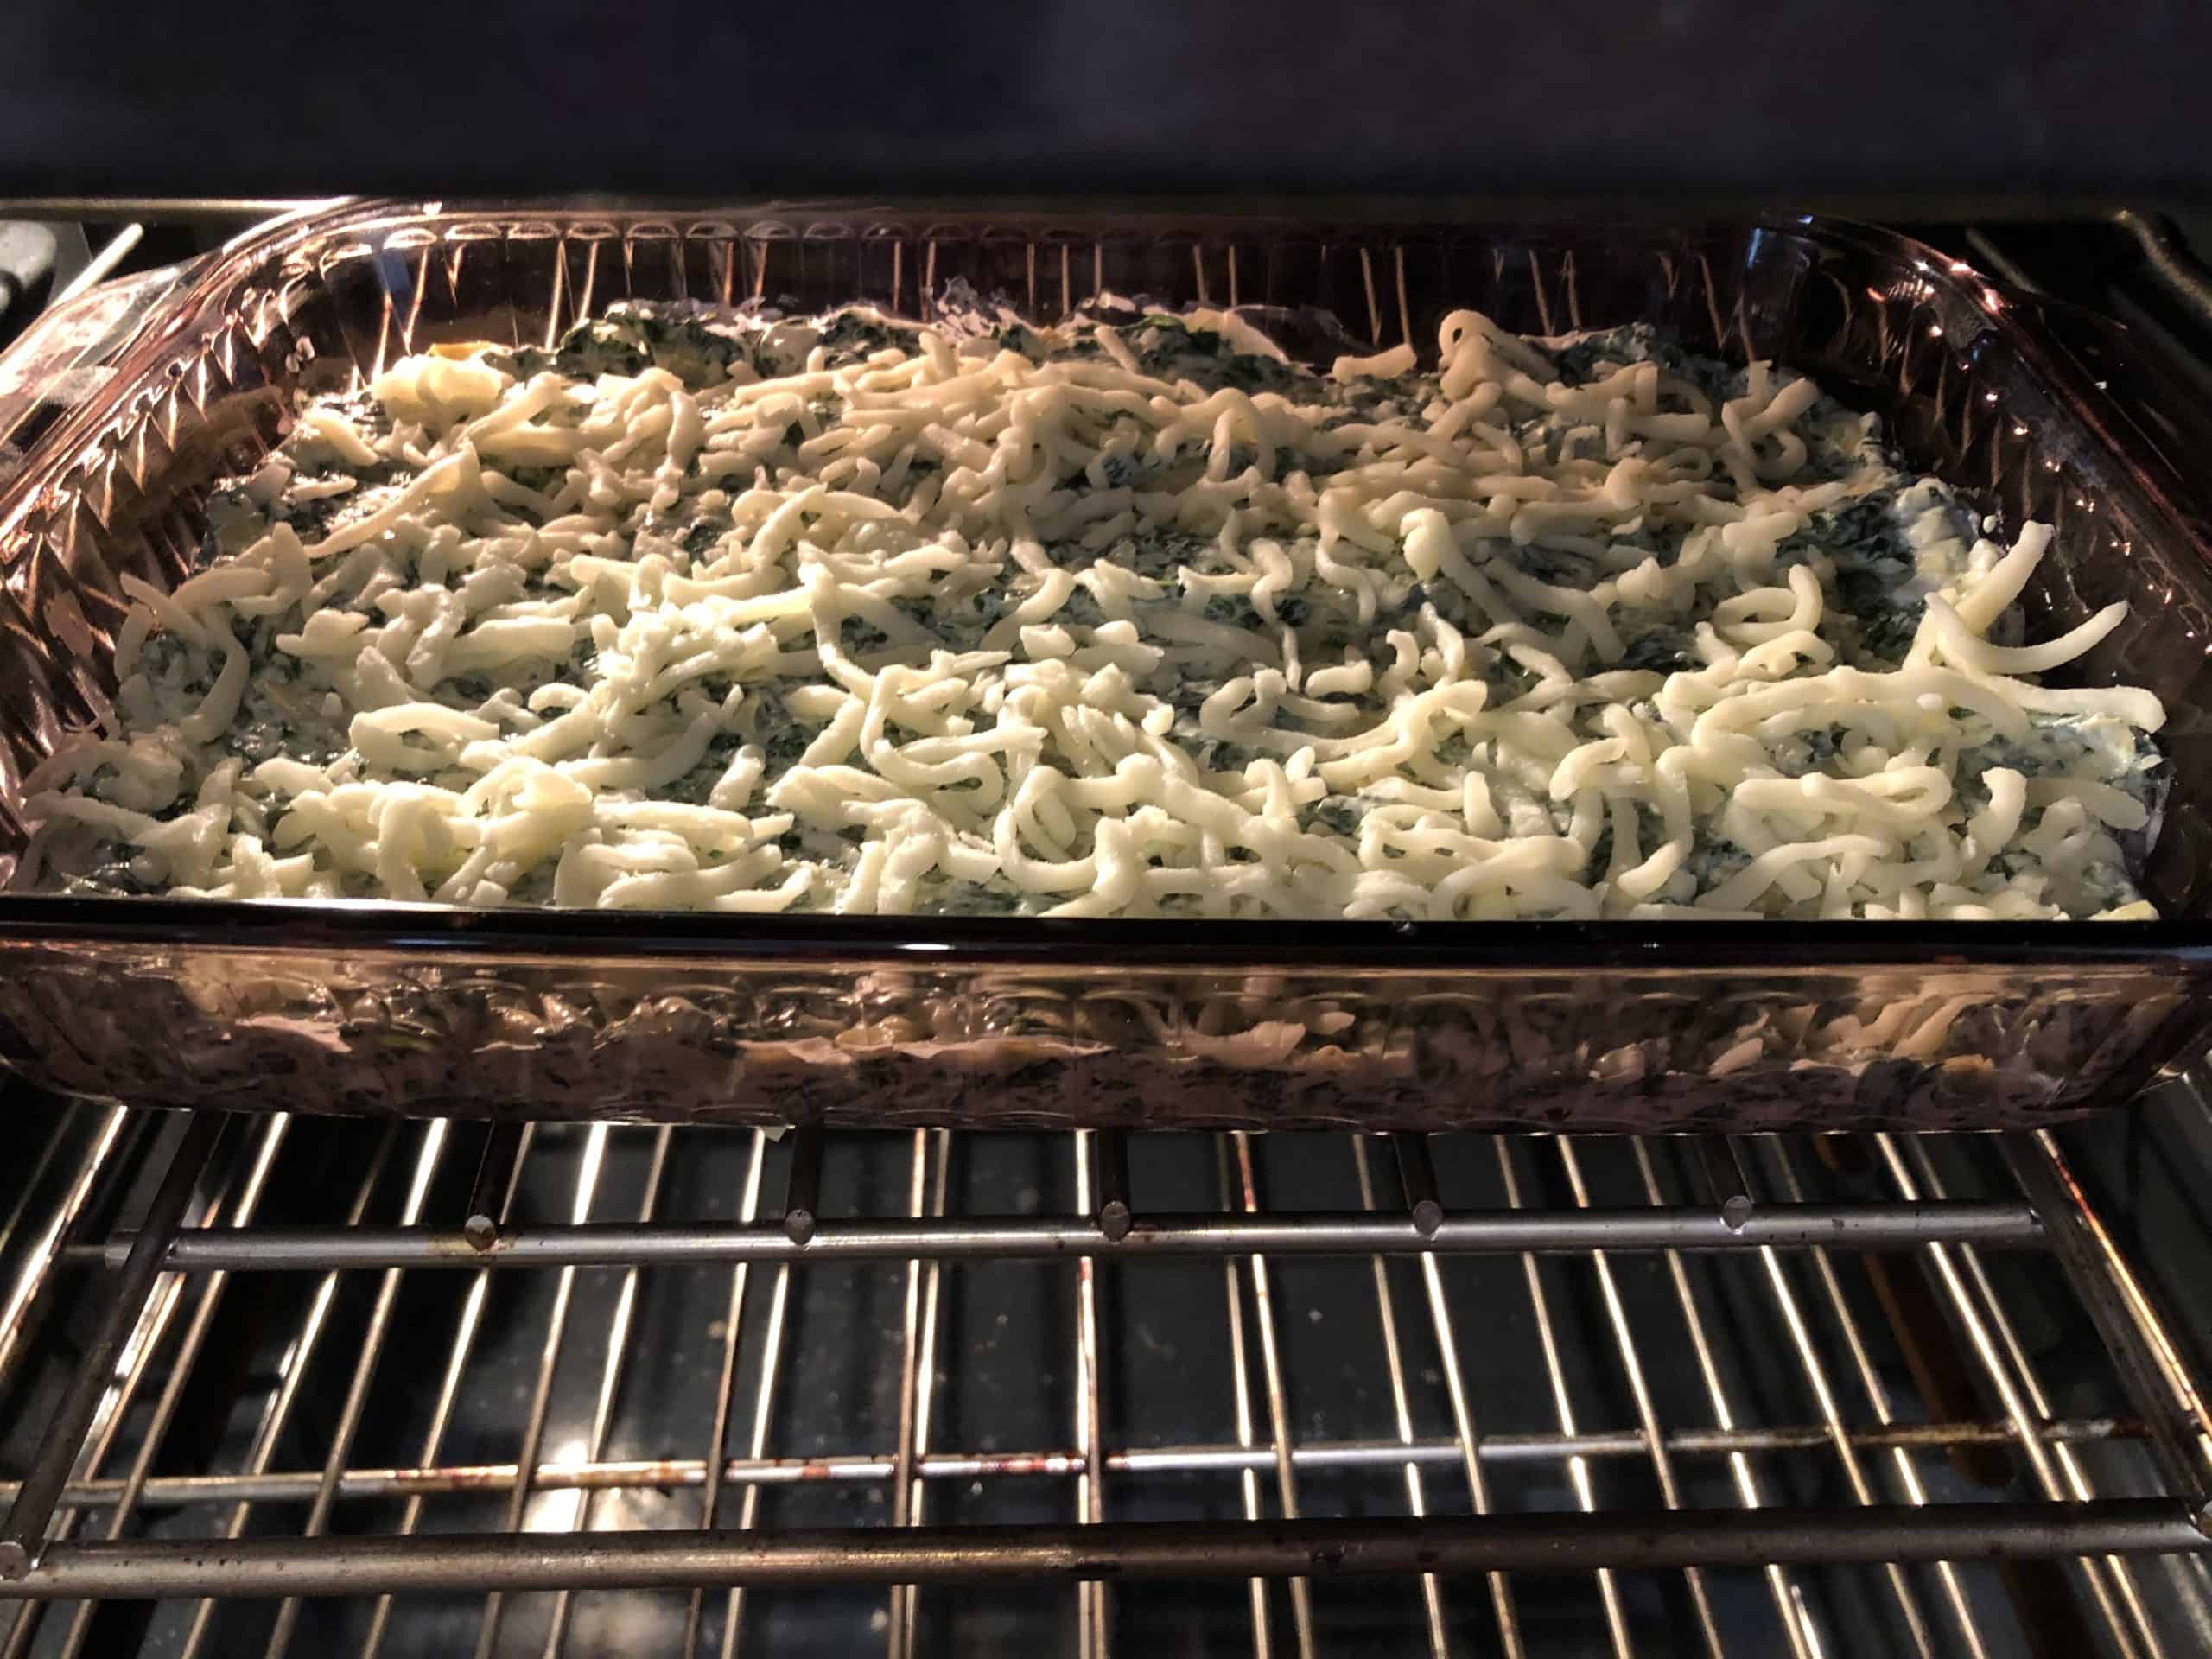 Baking Spinach Dip in the oven.